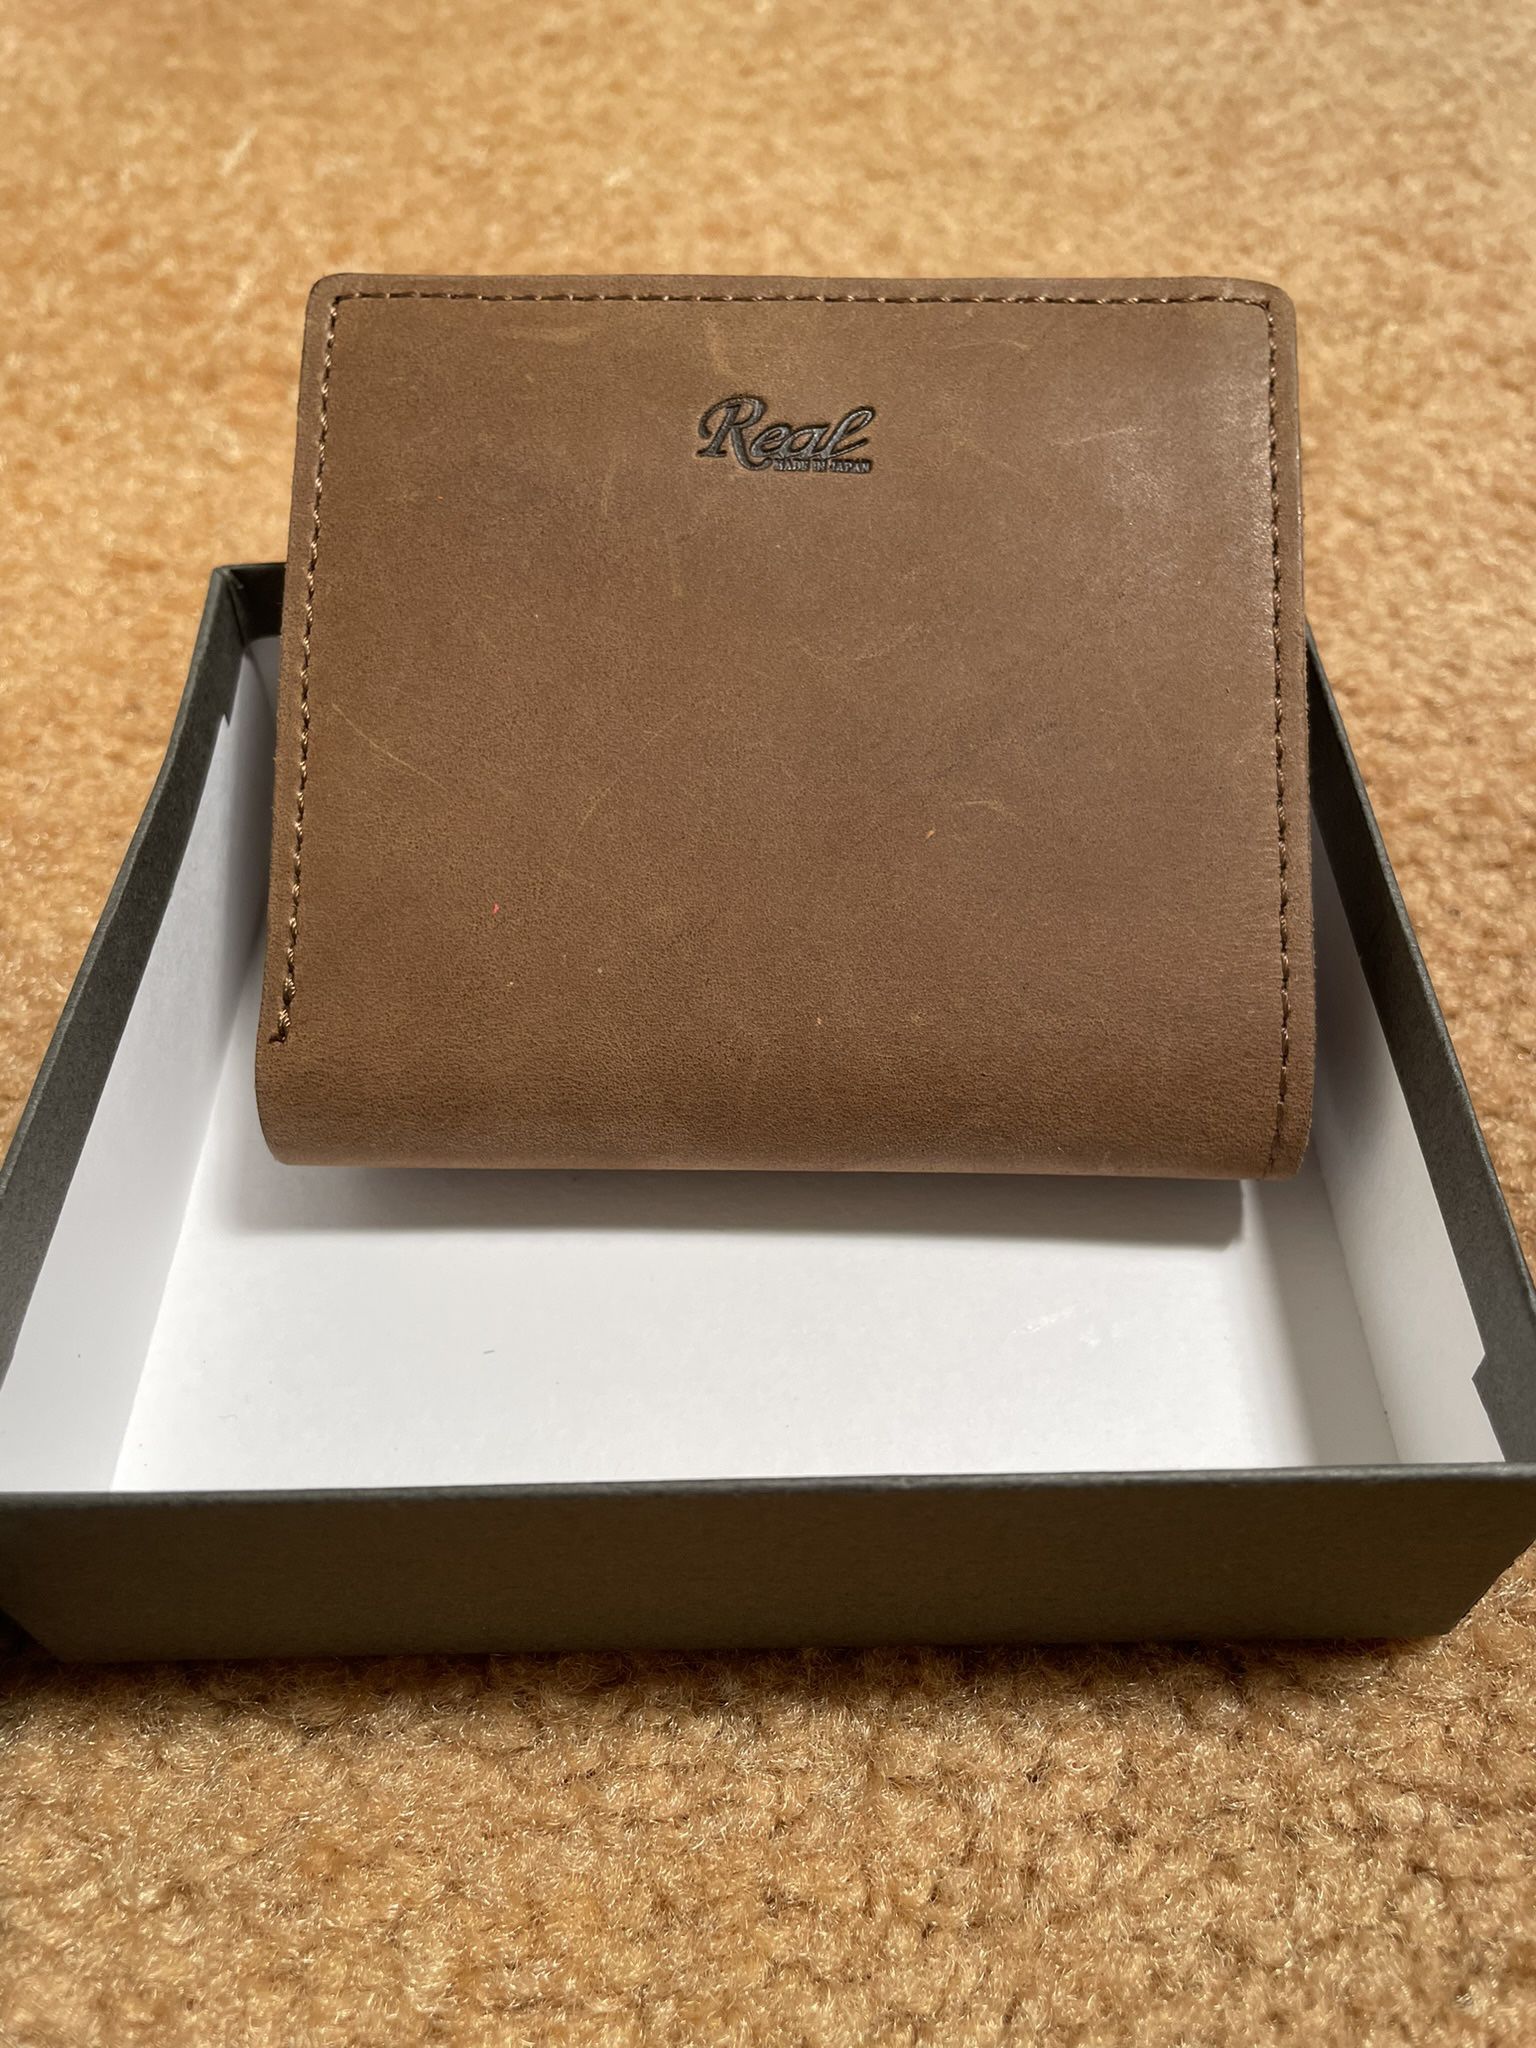 Imported Japanese Leather Wallet